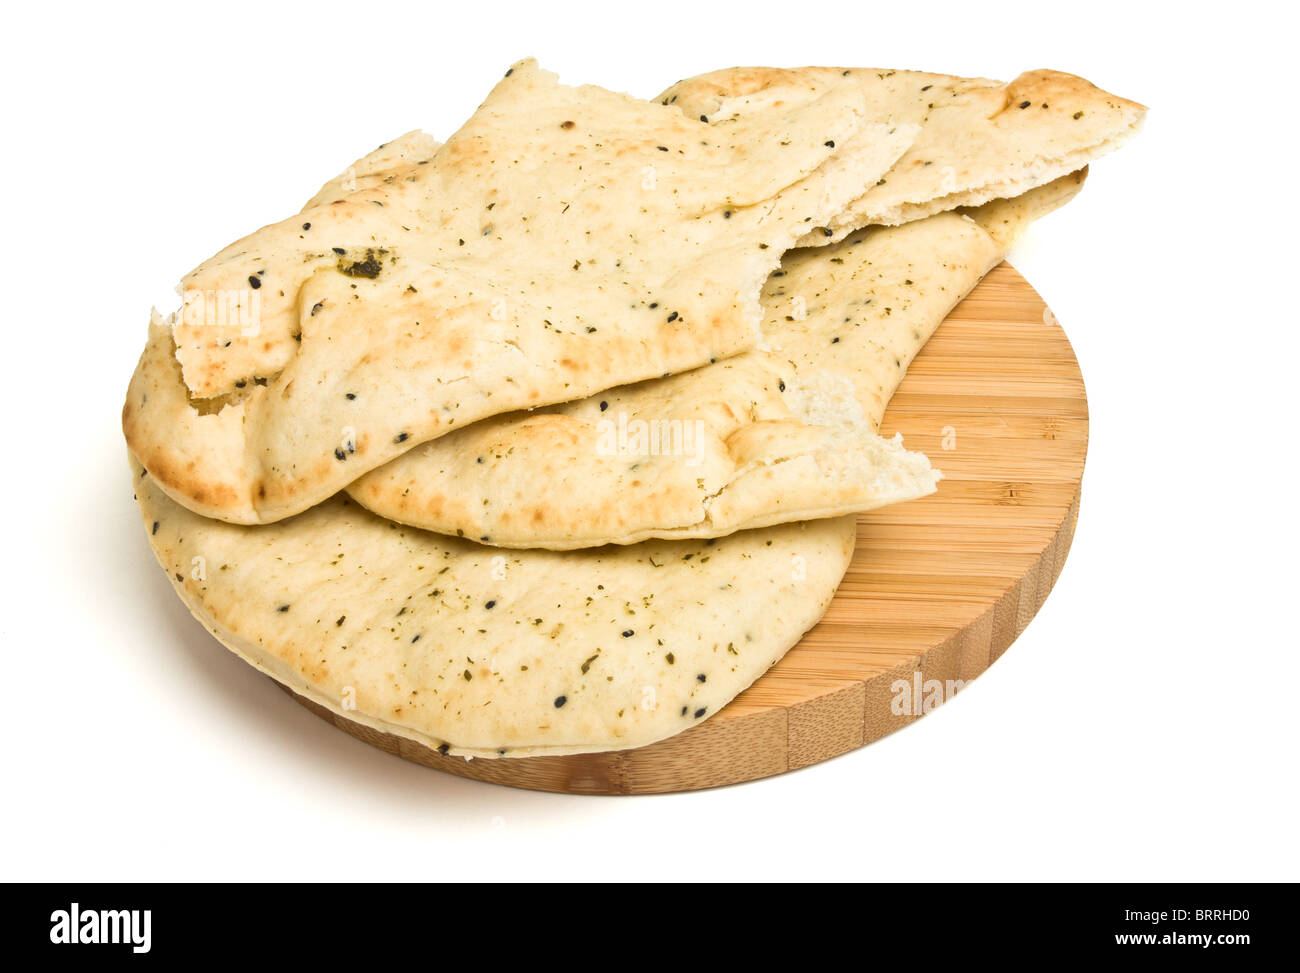 Indian unleavened bread side dish known as Naan Bread usually served with curry. Stock Photo